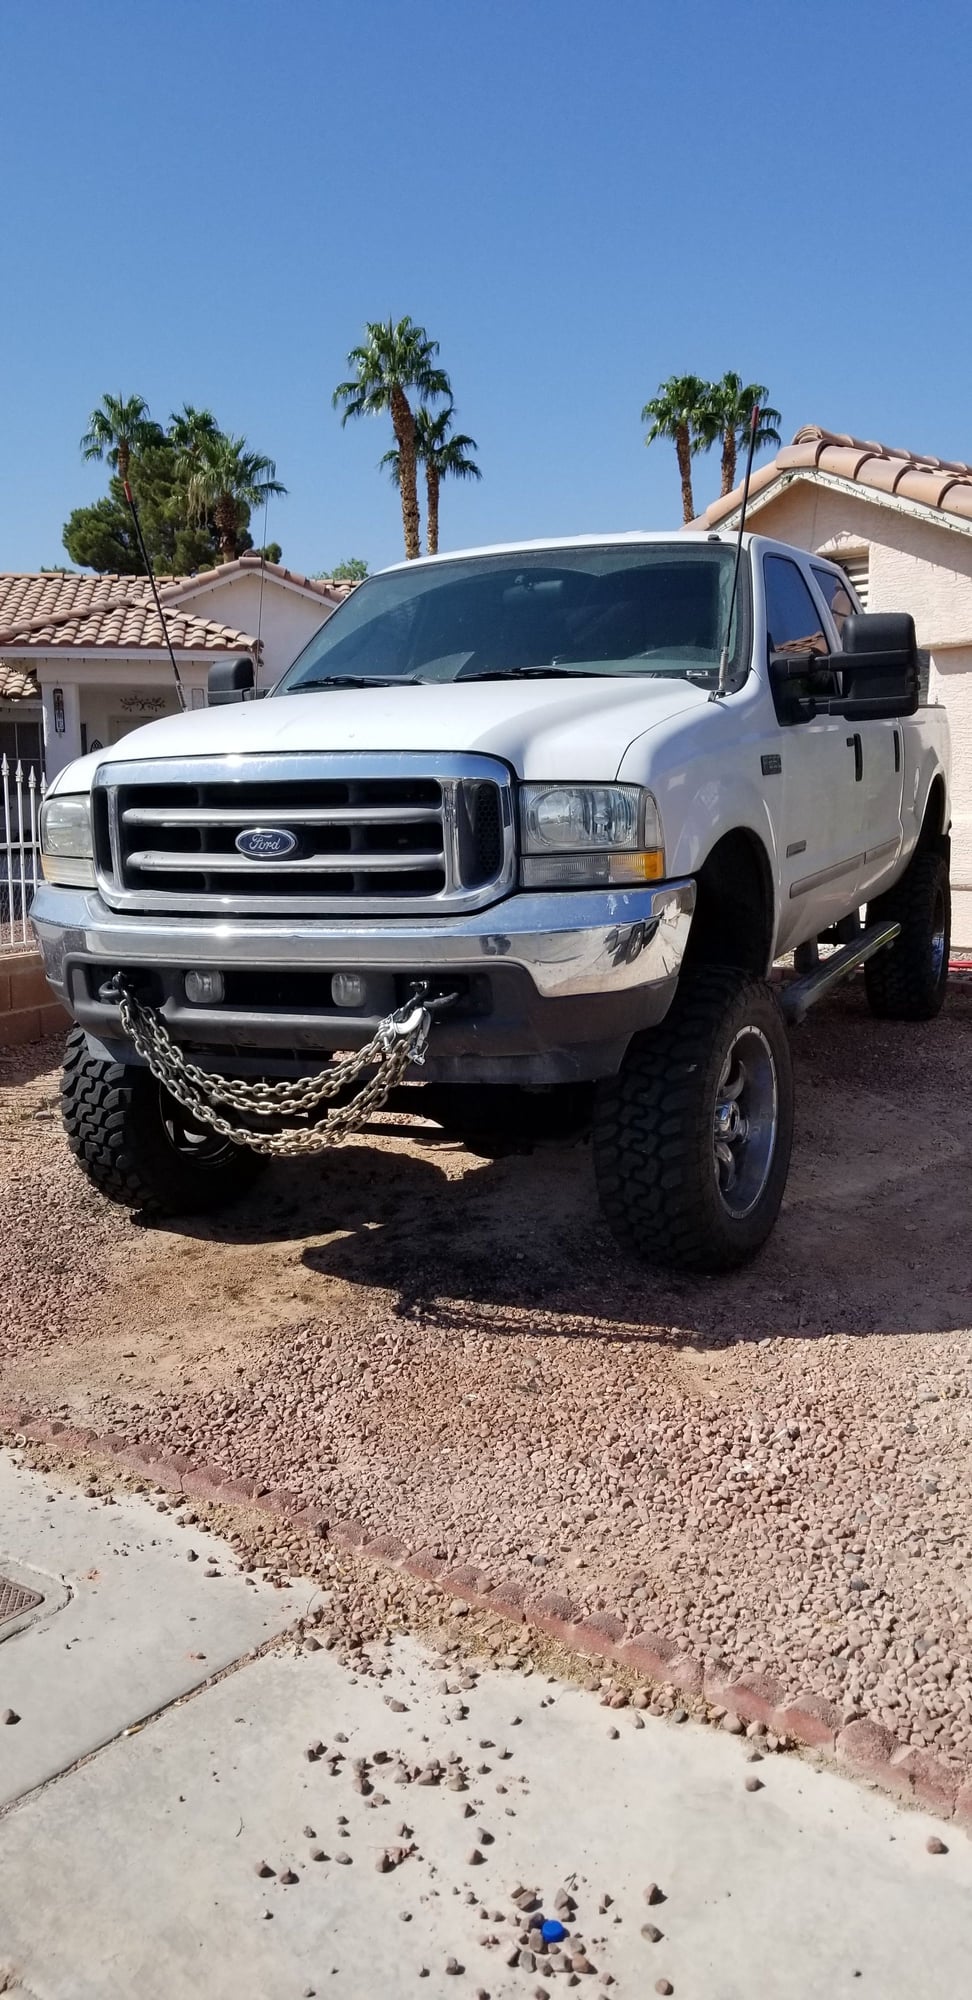 2004 Ford F-250 Super Duty - Ford F250 6.0l Diesel 4x4 - Used - VIN 1FTNW21P24ED53568 - 236,000 Miles - 8 cyl - 4WD - Automatic - Truck - White - North Las Vegas, NV 89031, United States